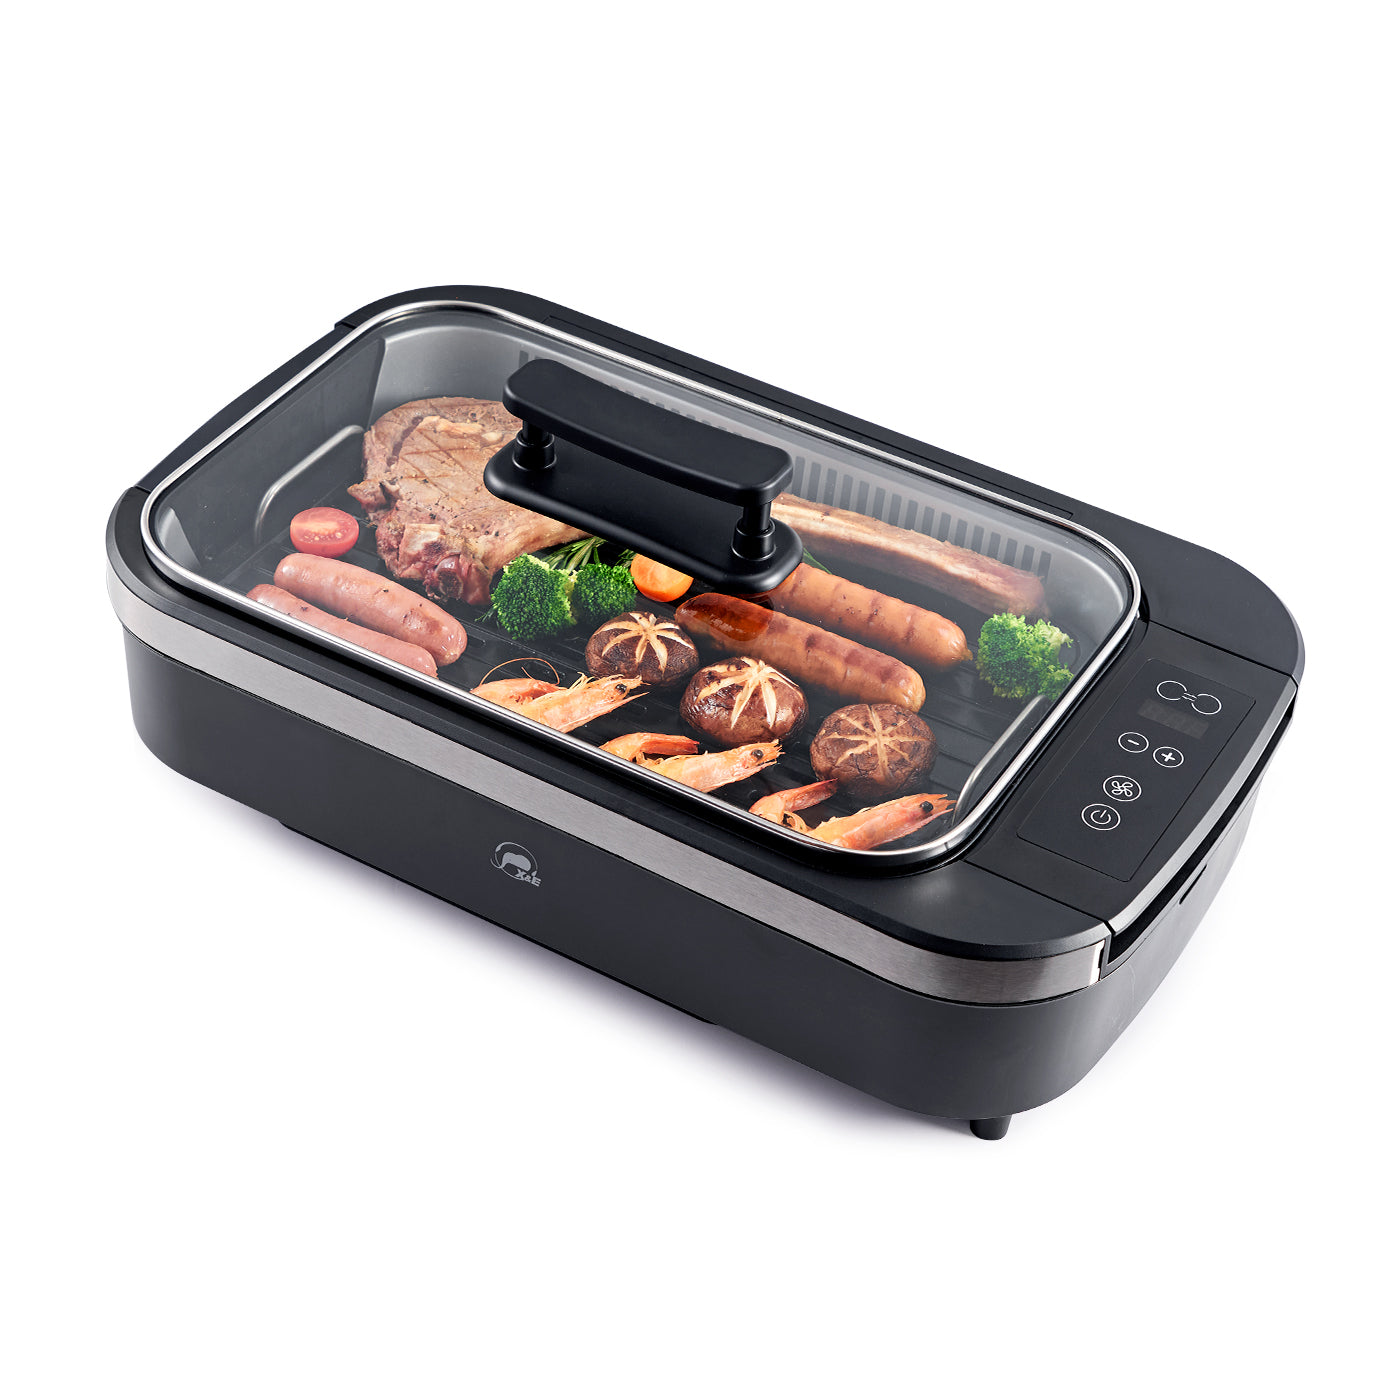 The X&E Indoor Smokeless Grill is a high quality, high performance grill that provides users with a faster, more convenient and healthier cooking experience.